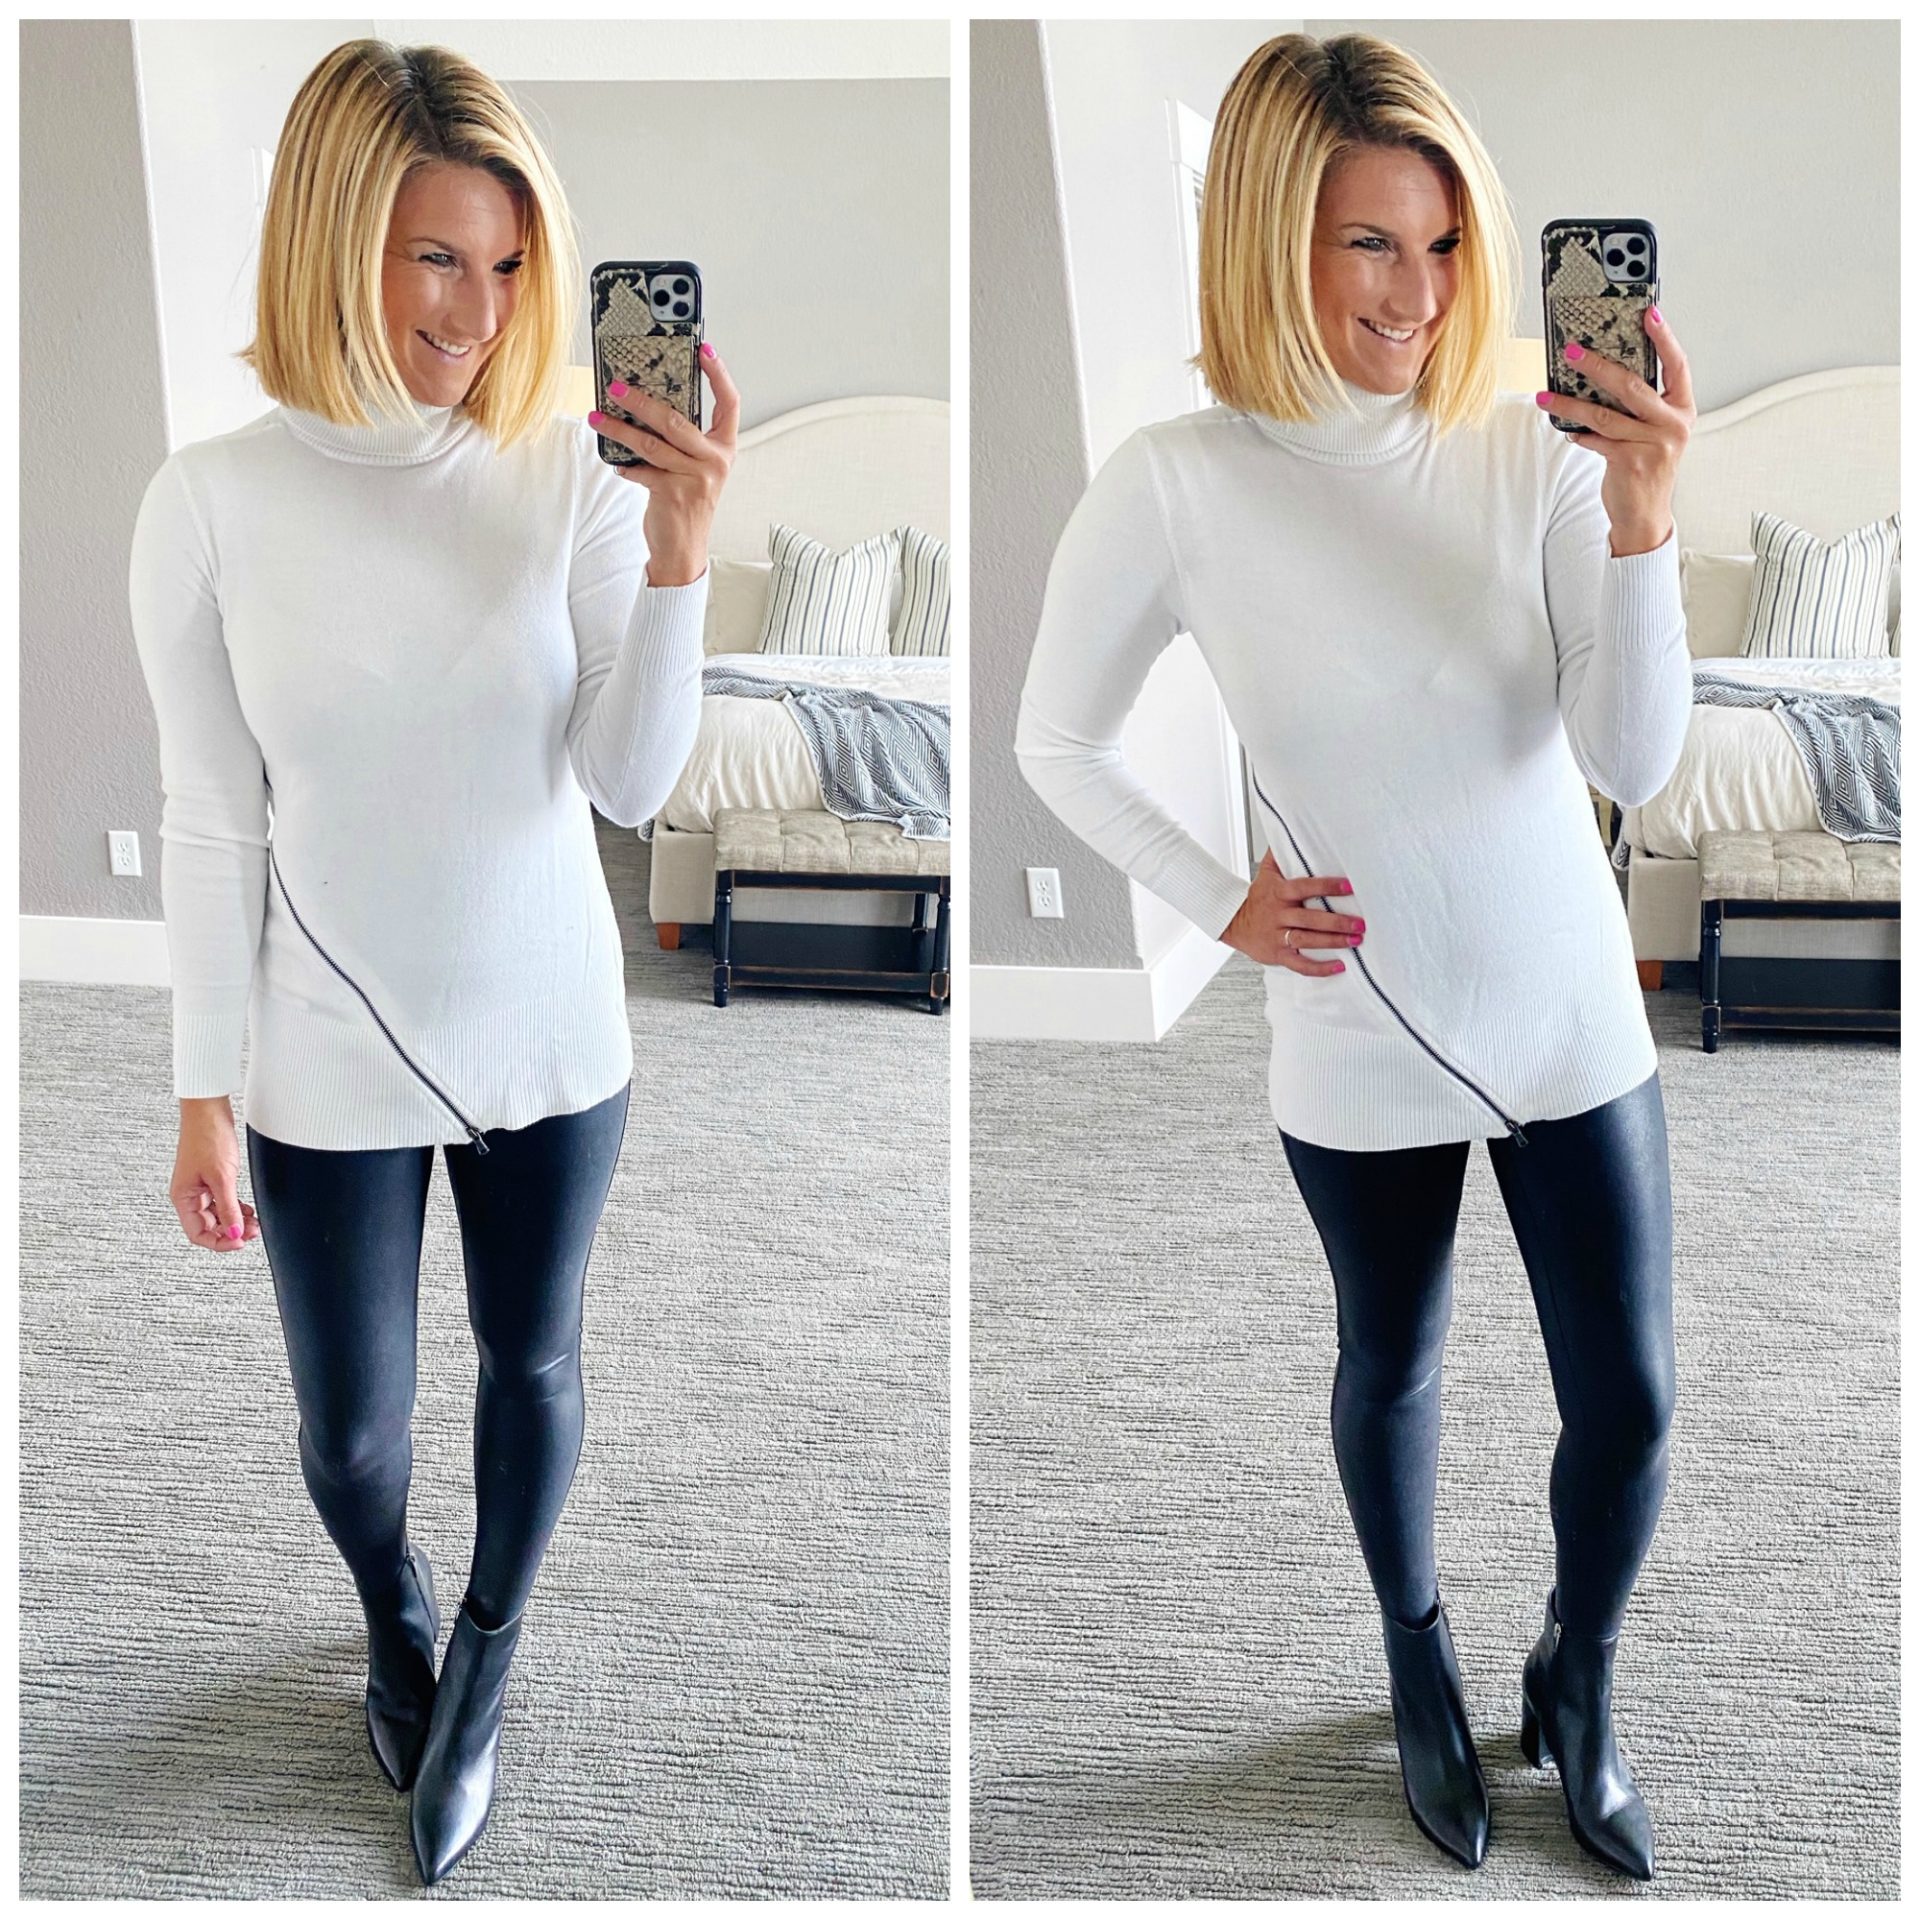 What Are The Best Tops To Wear With Leggings? – LacunaFit